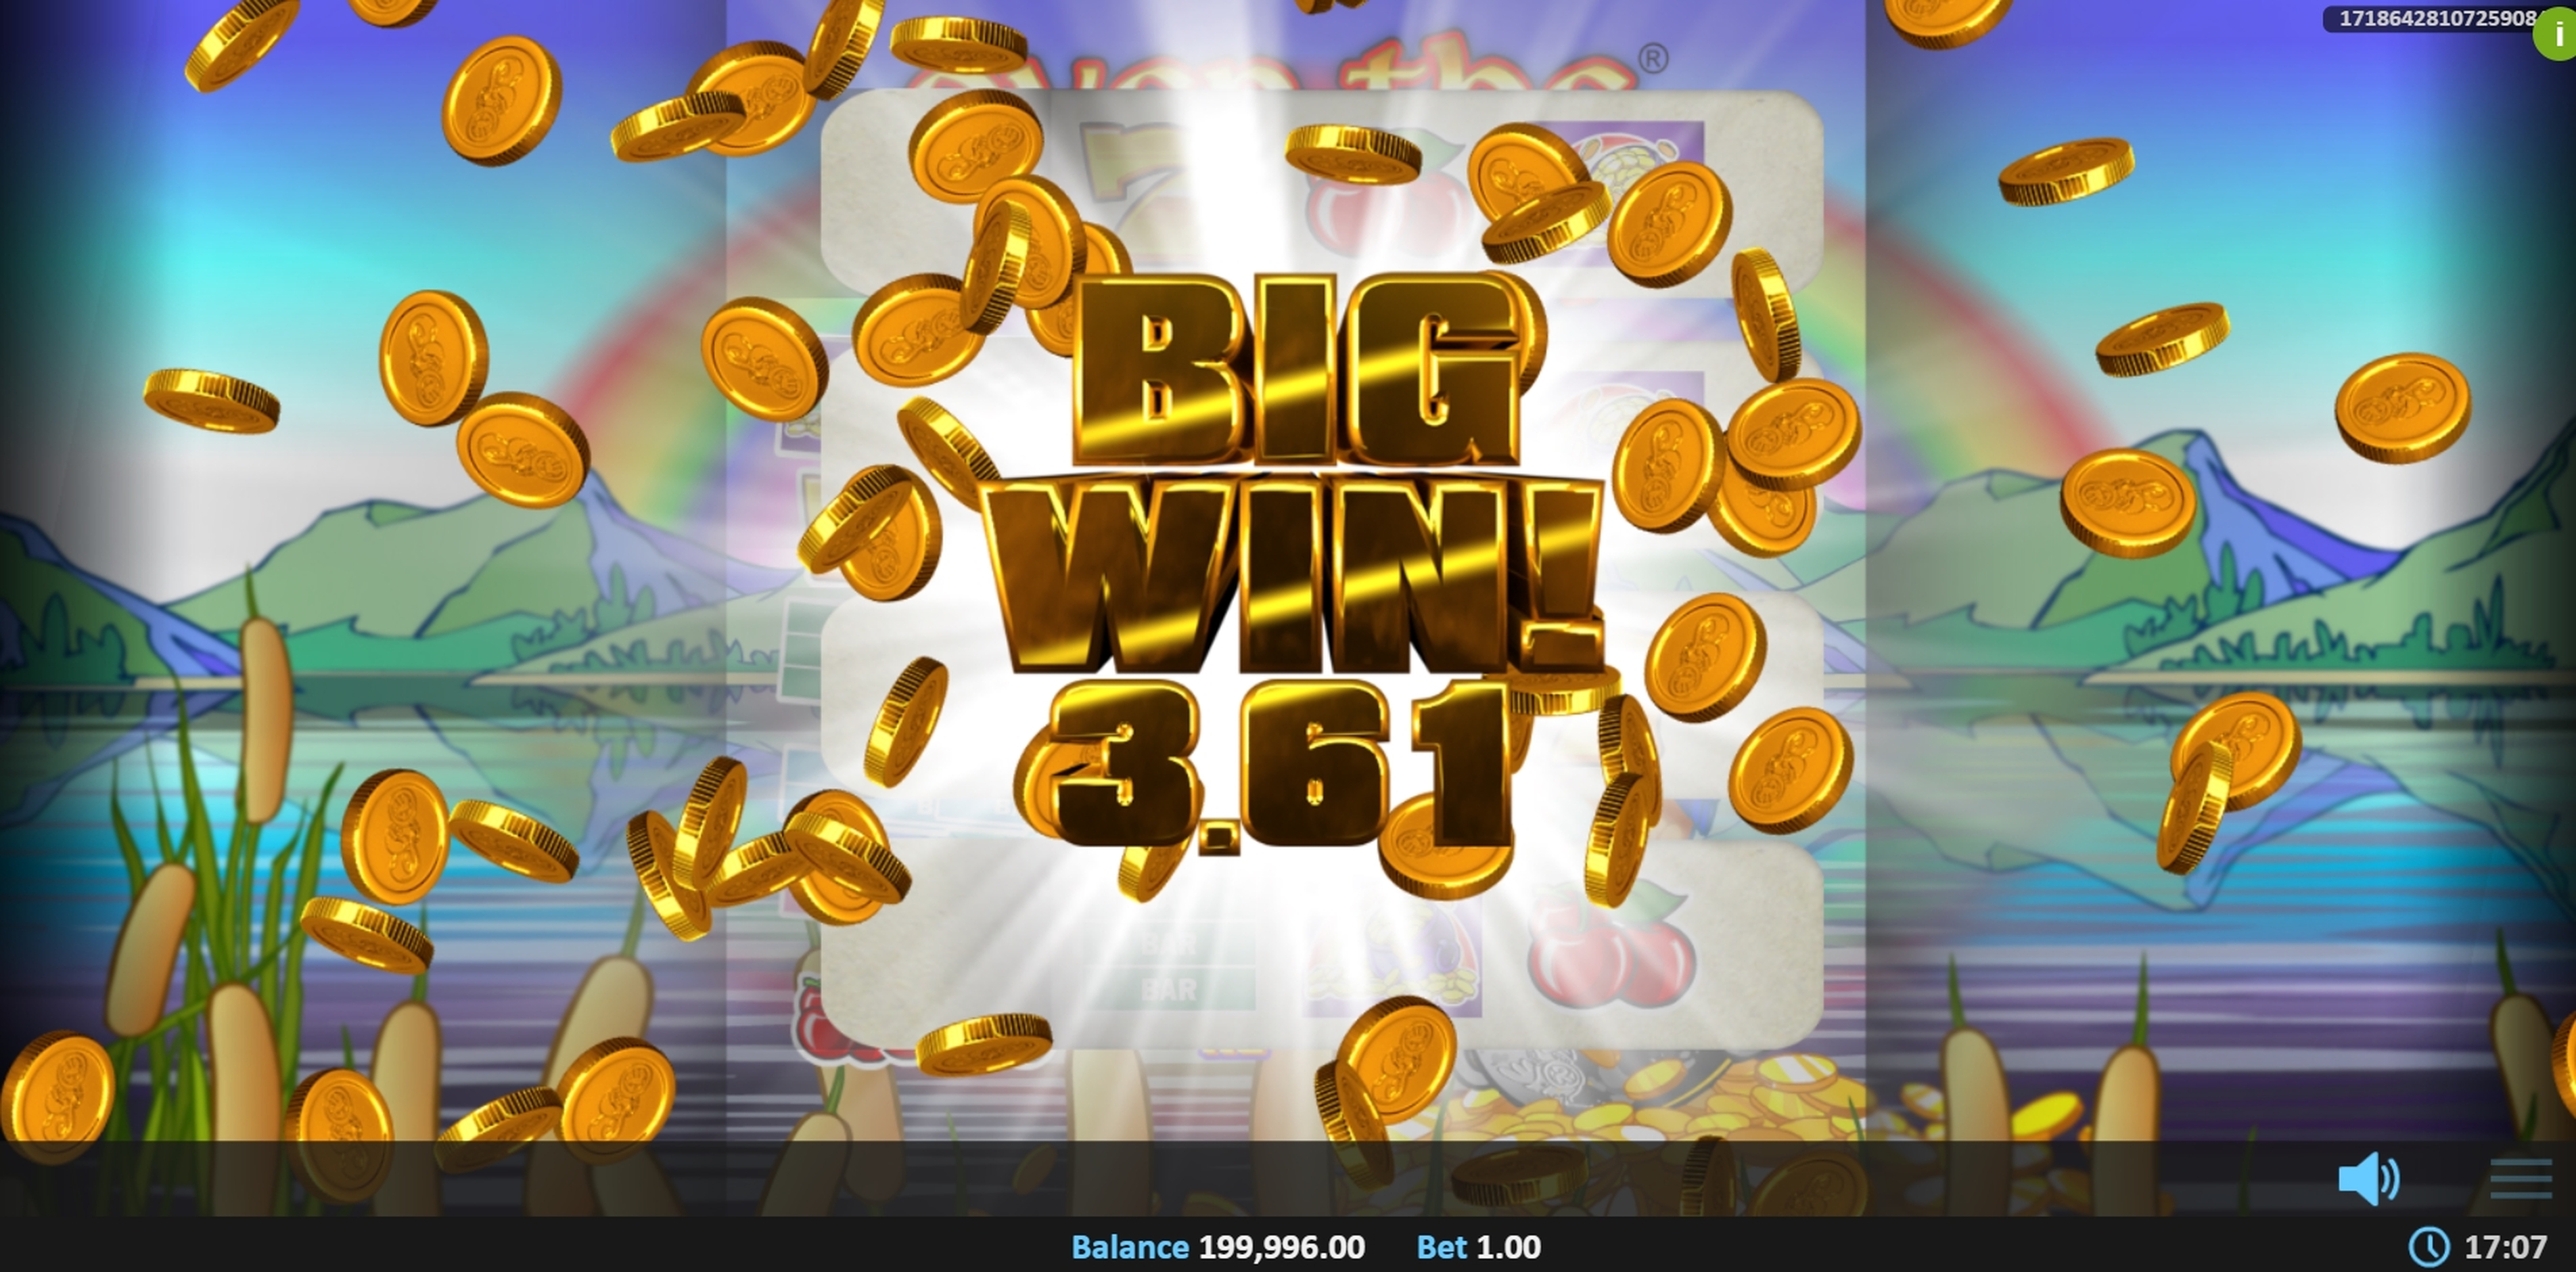 Win Money in Over the Rainbow Pull Tab Free Slot Game by Realistic Games